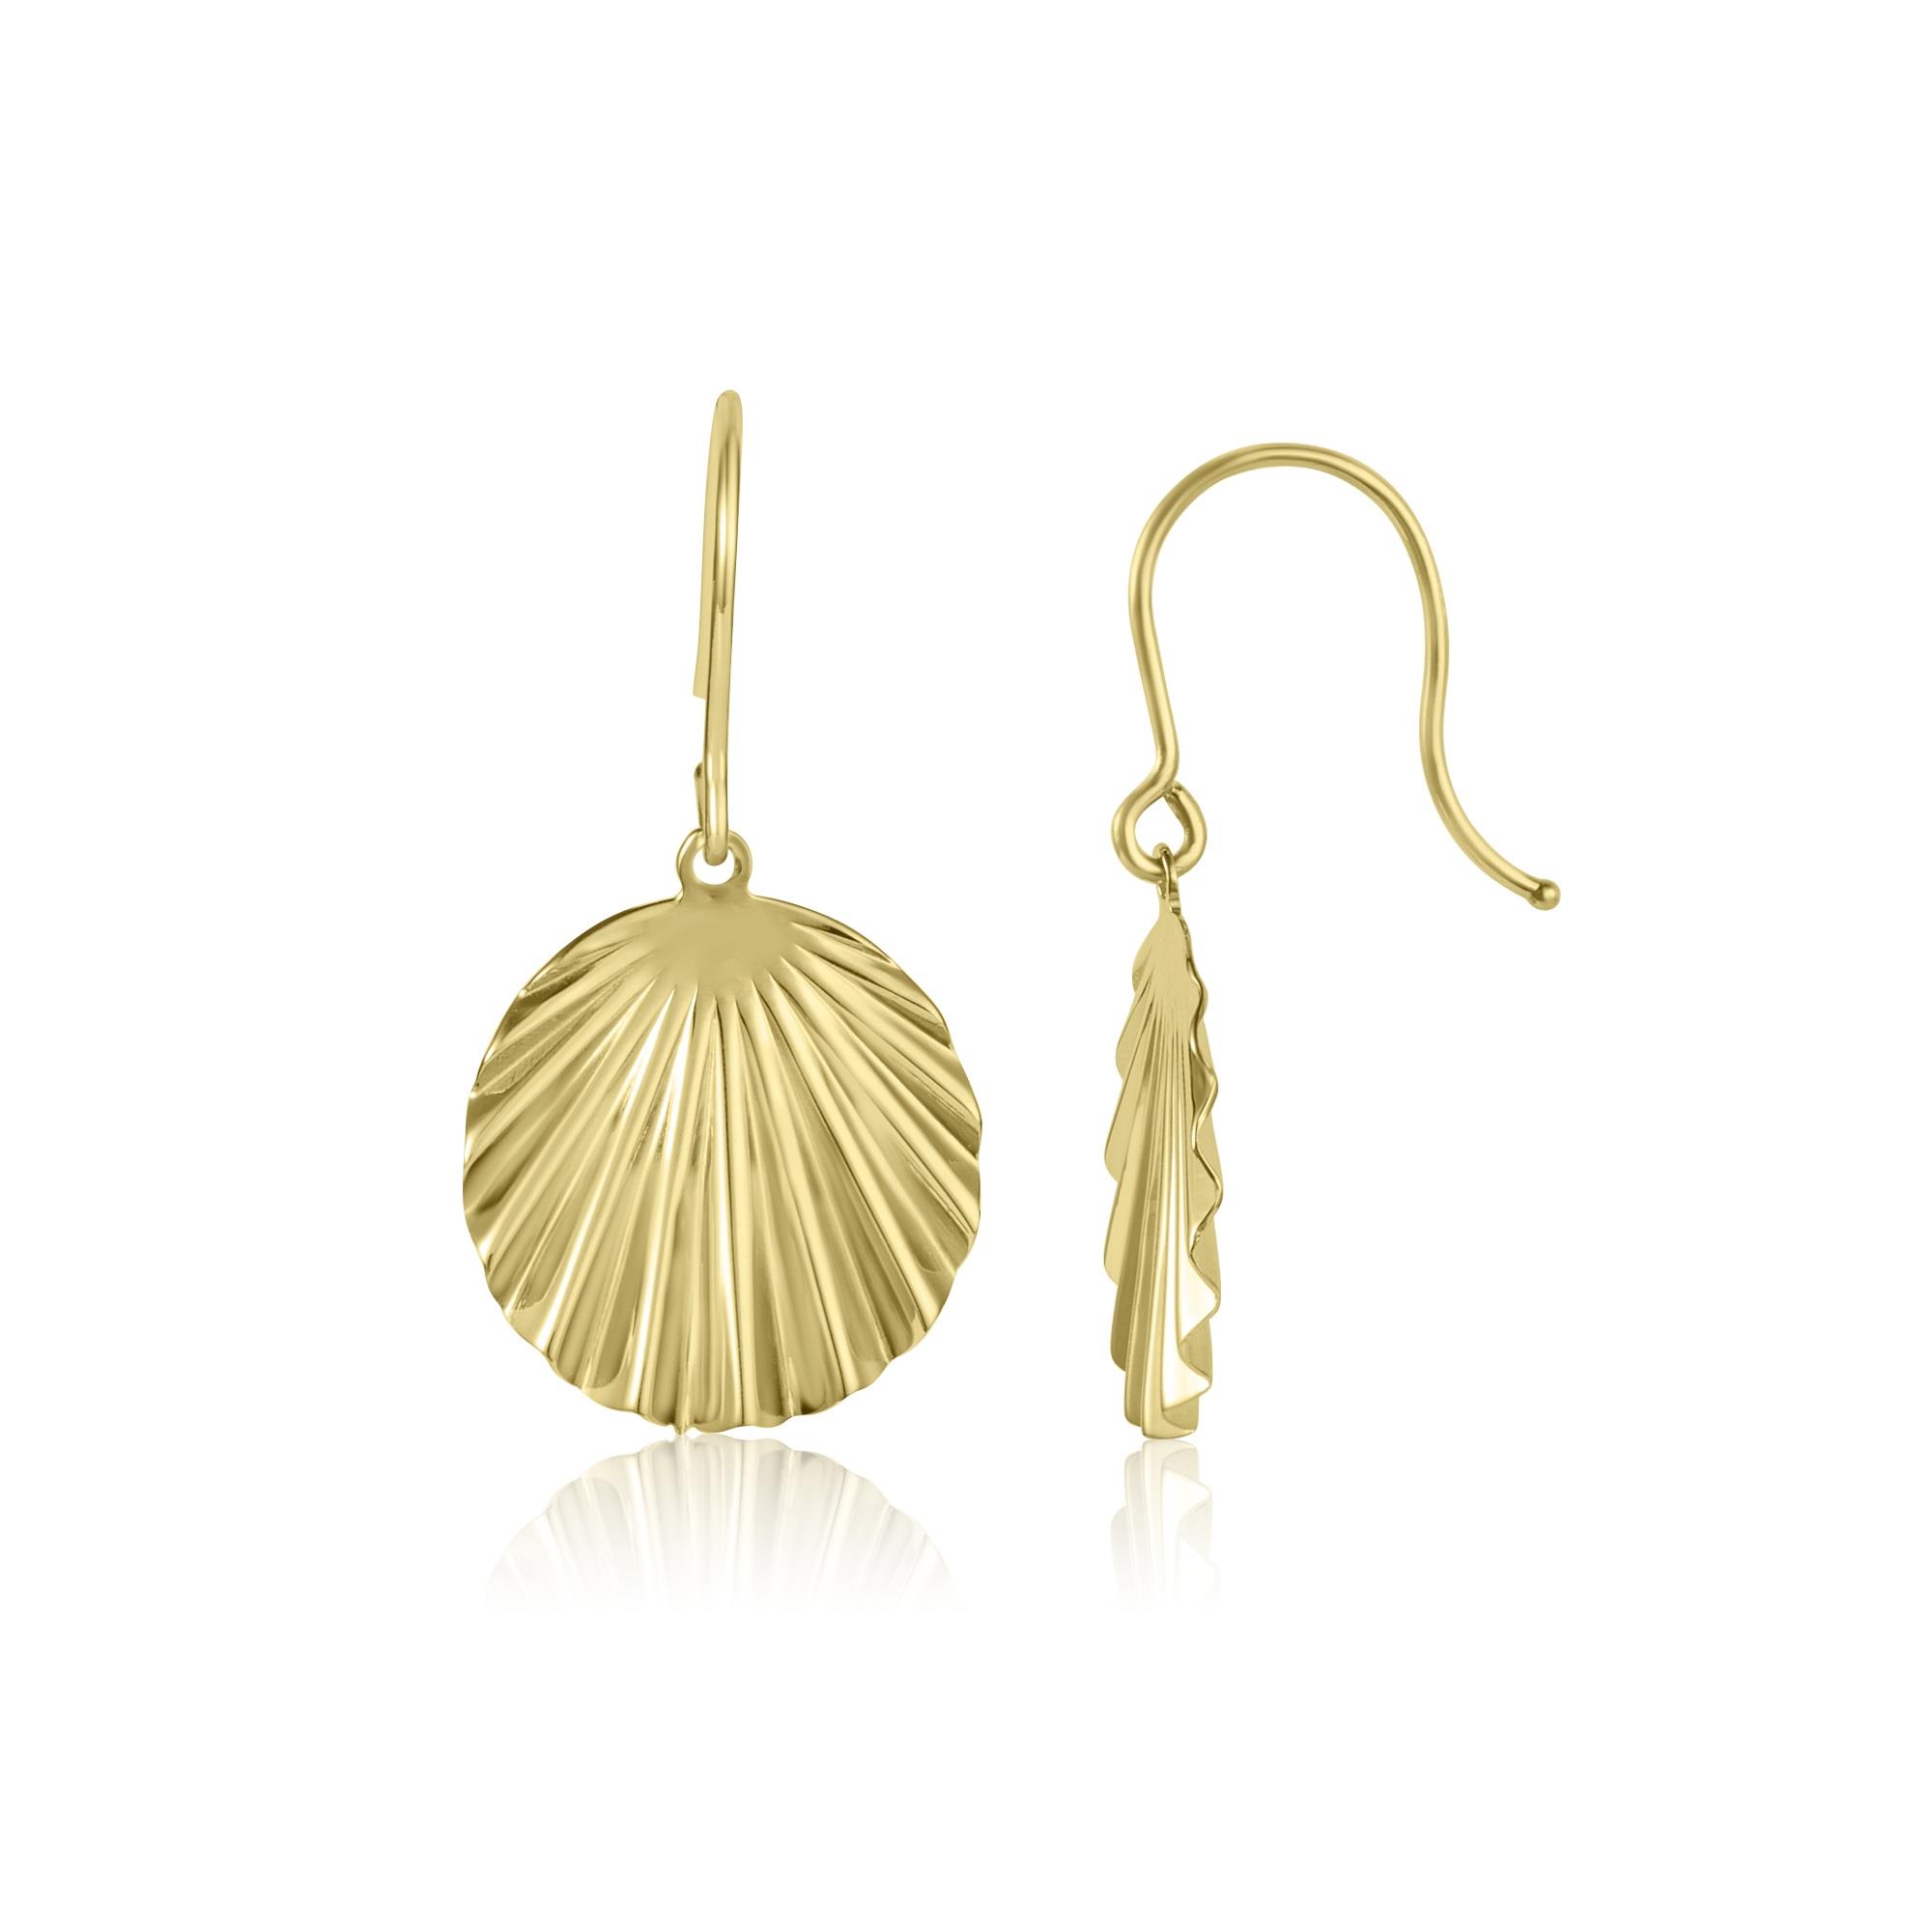 18ct Yellow Gold Shell Design Drop Earrings Pravins